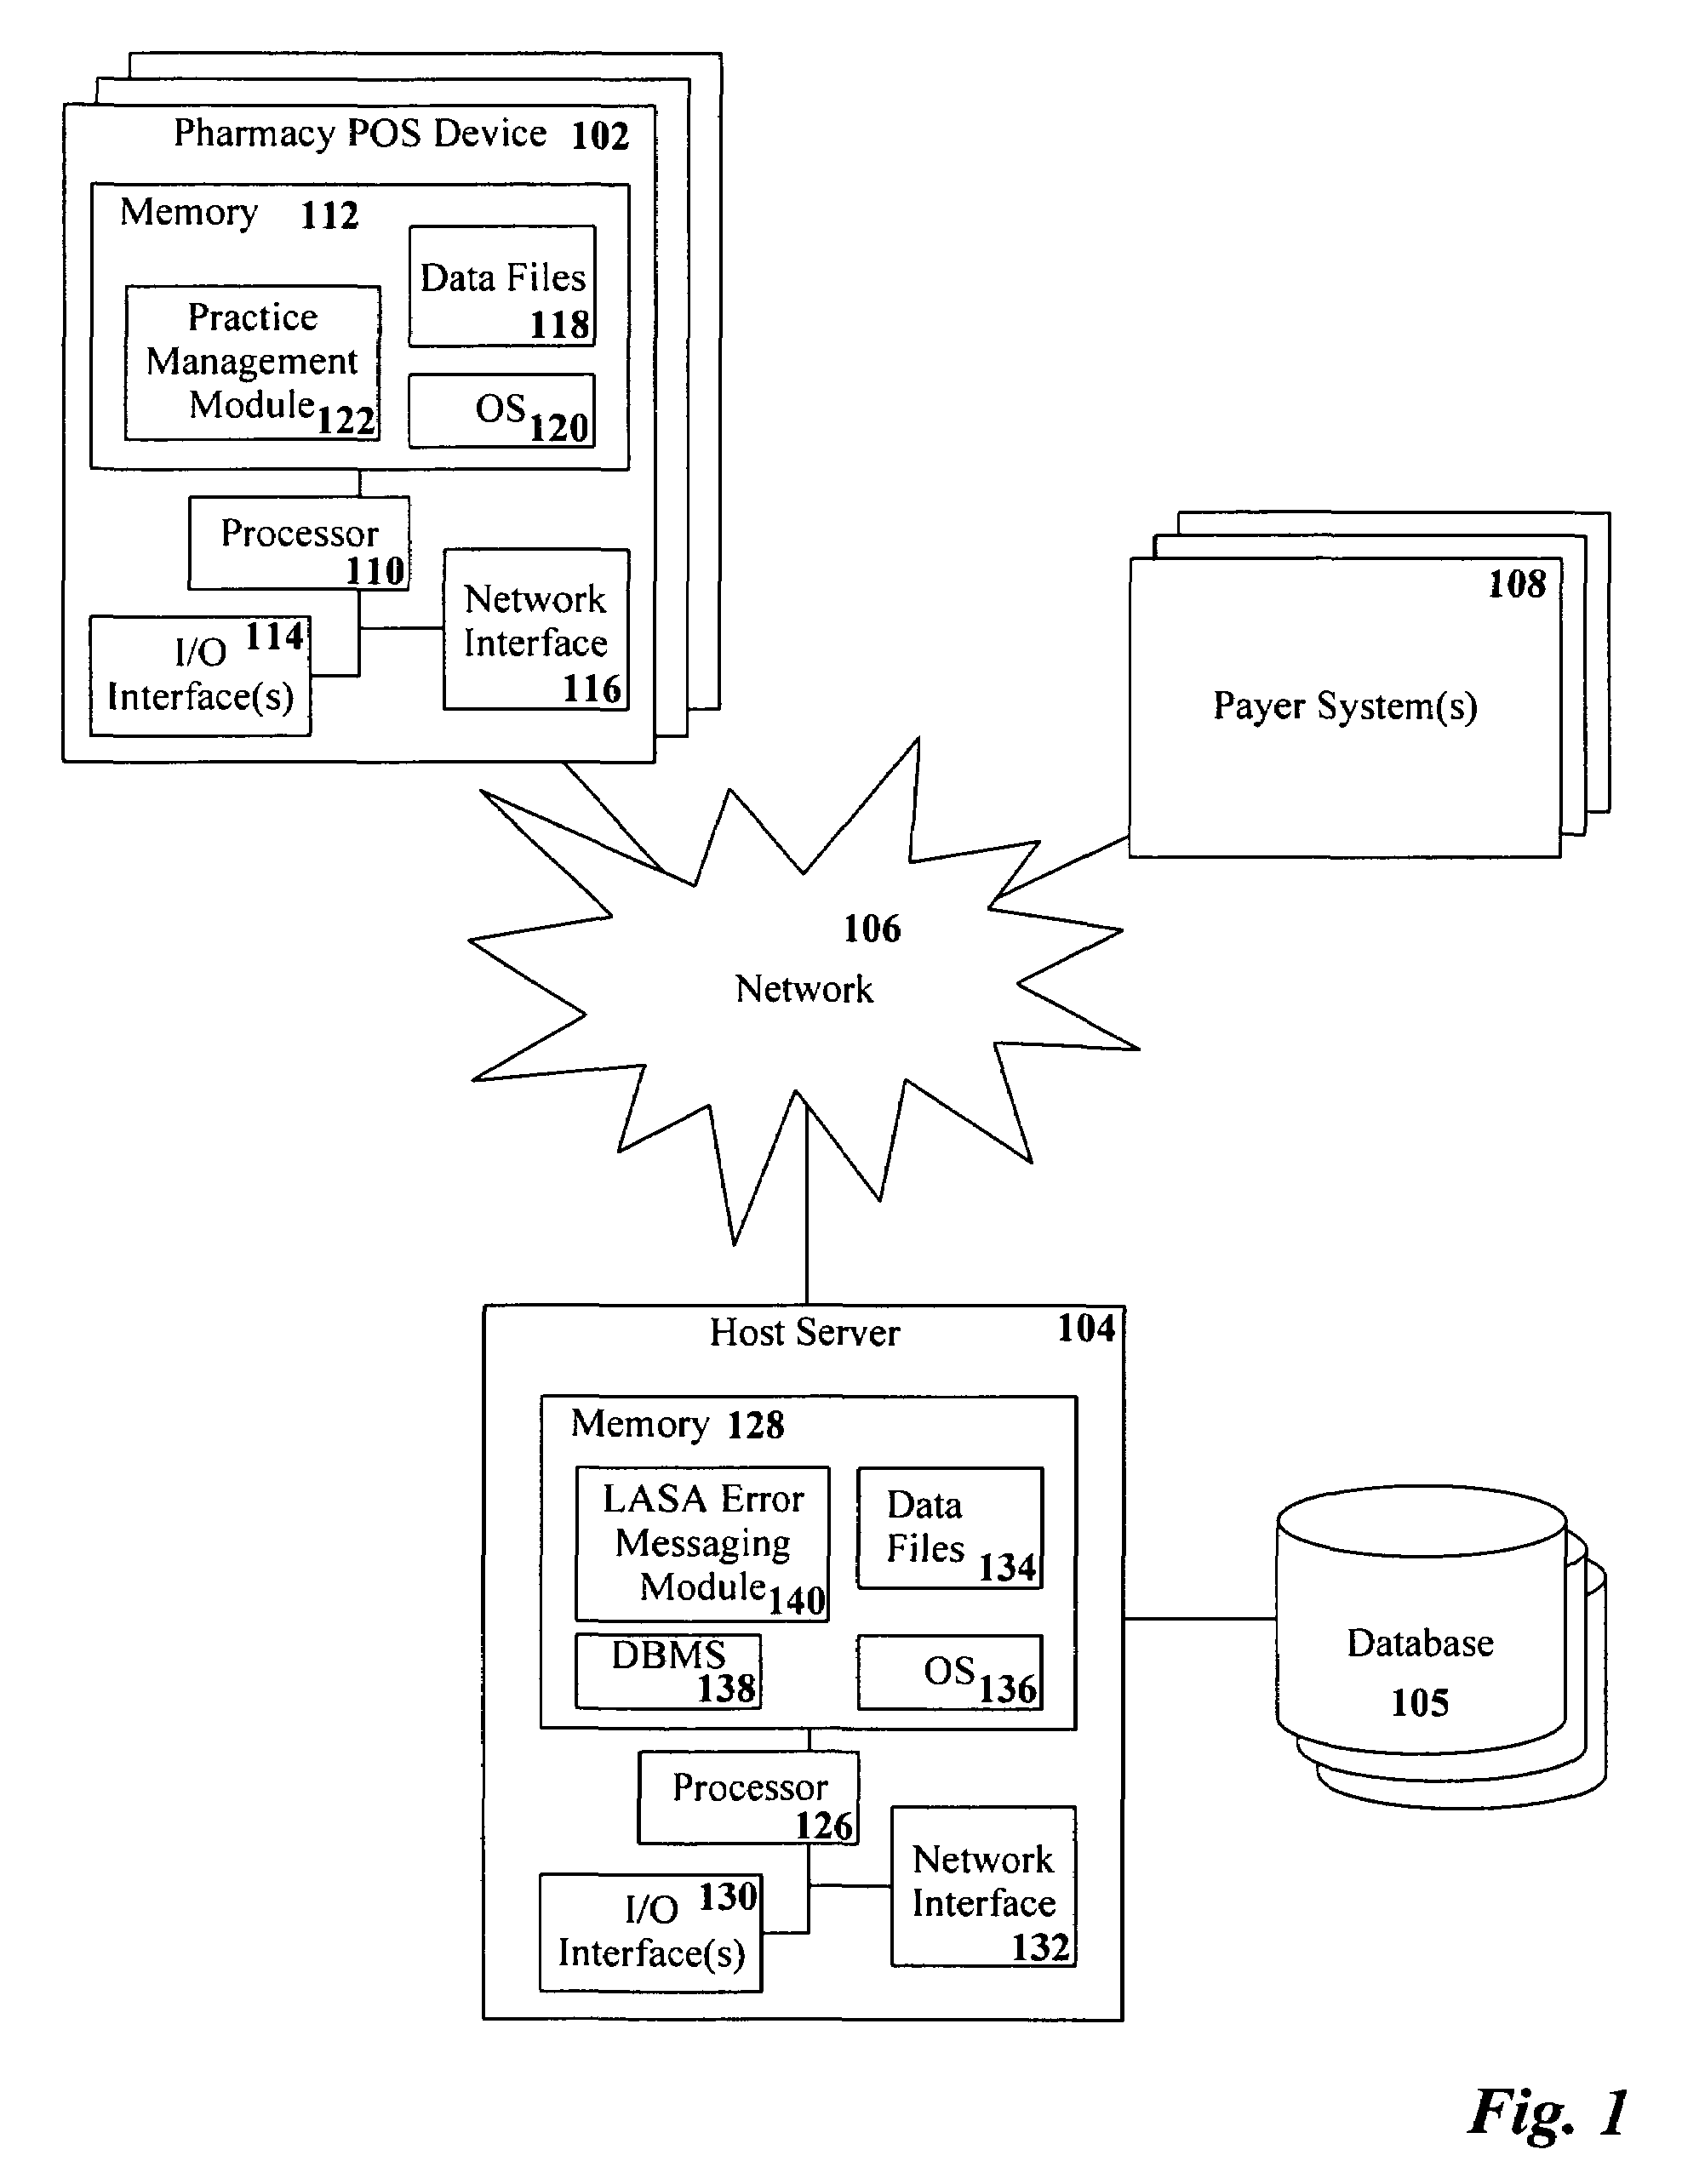 Systems and methods for look-alike sound-alike medication error messaging